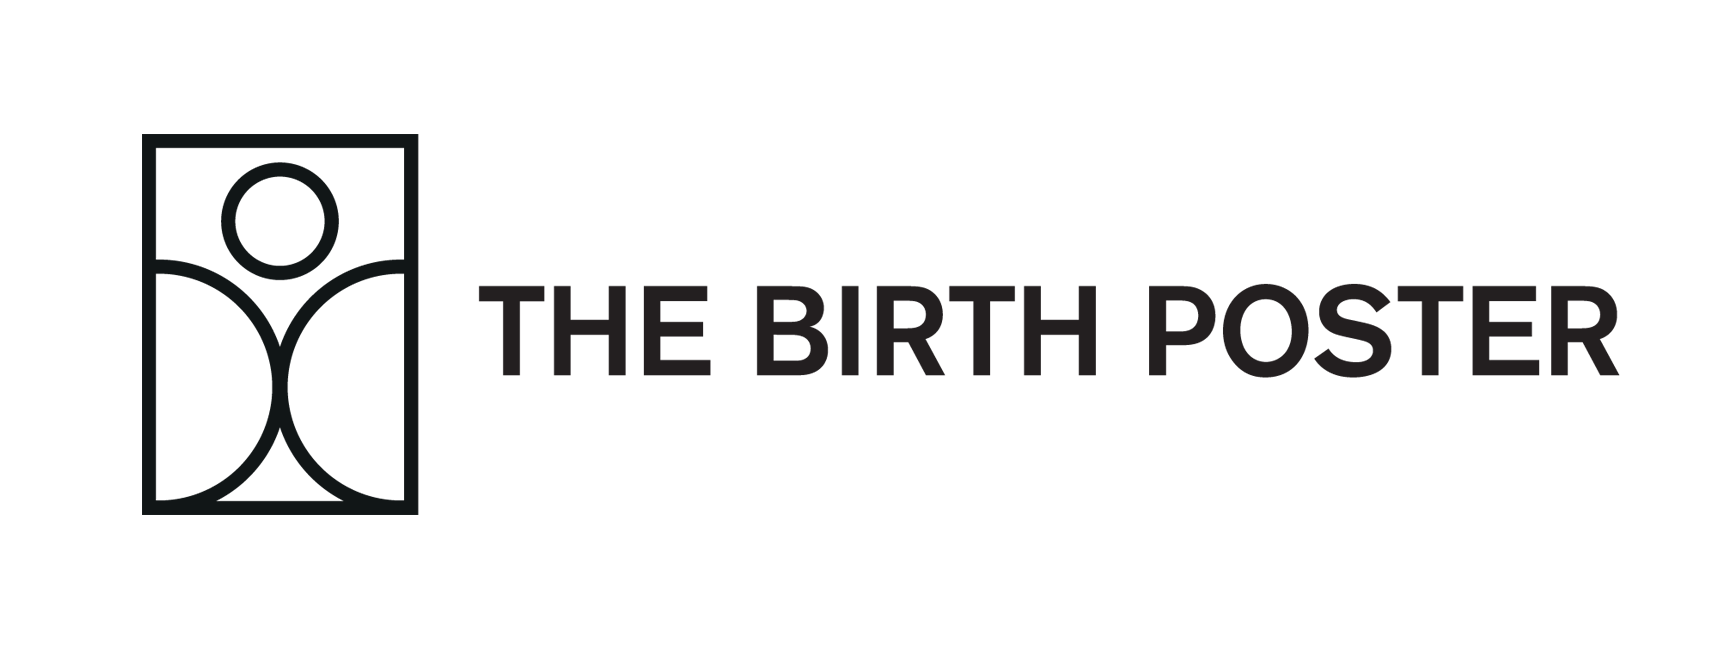 THE BIRTH POSTER